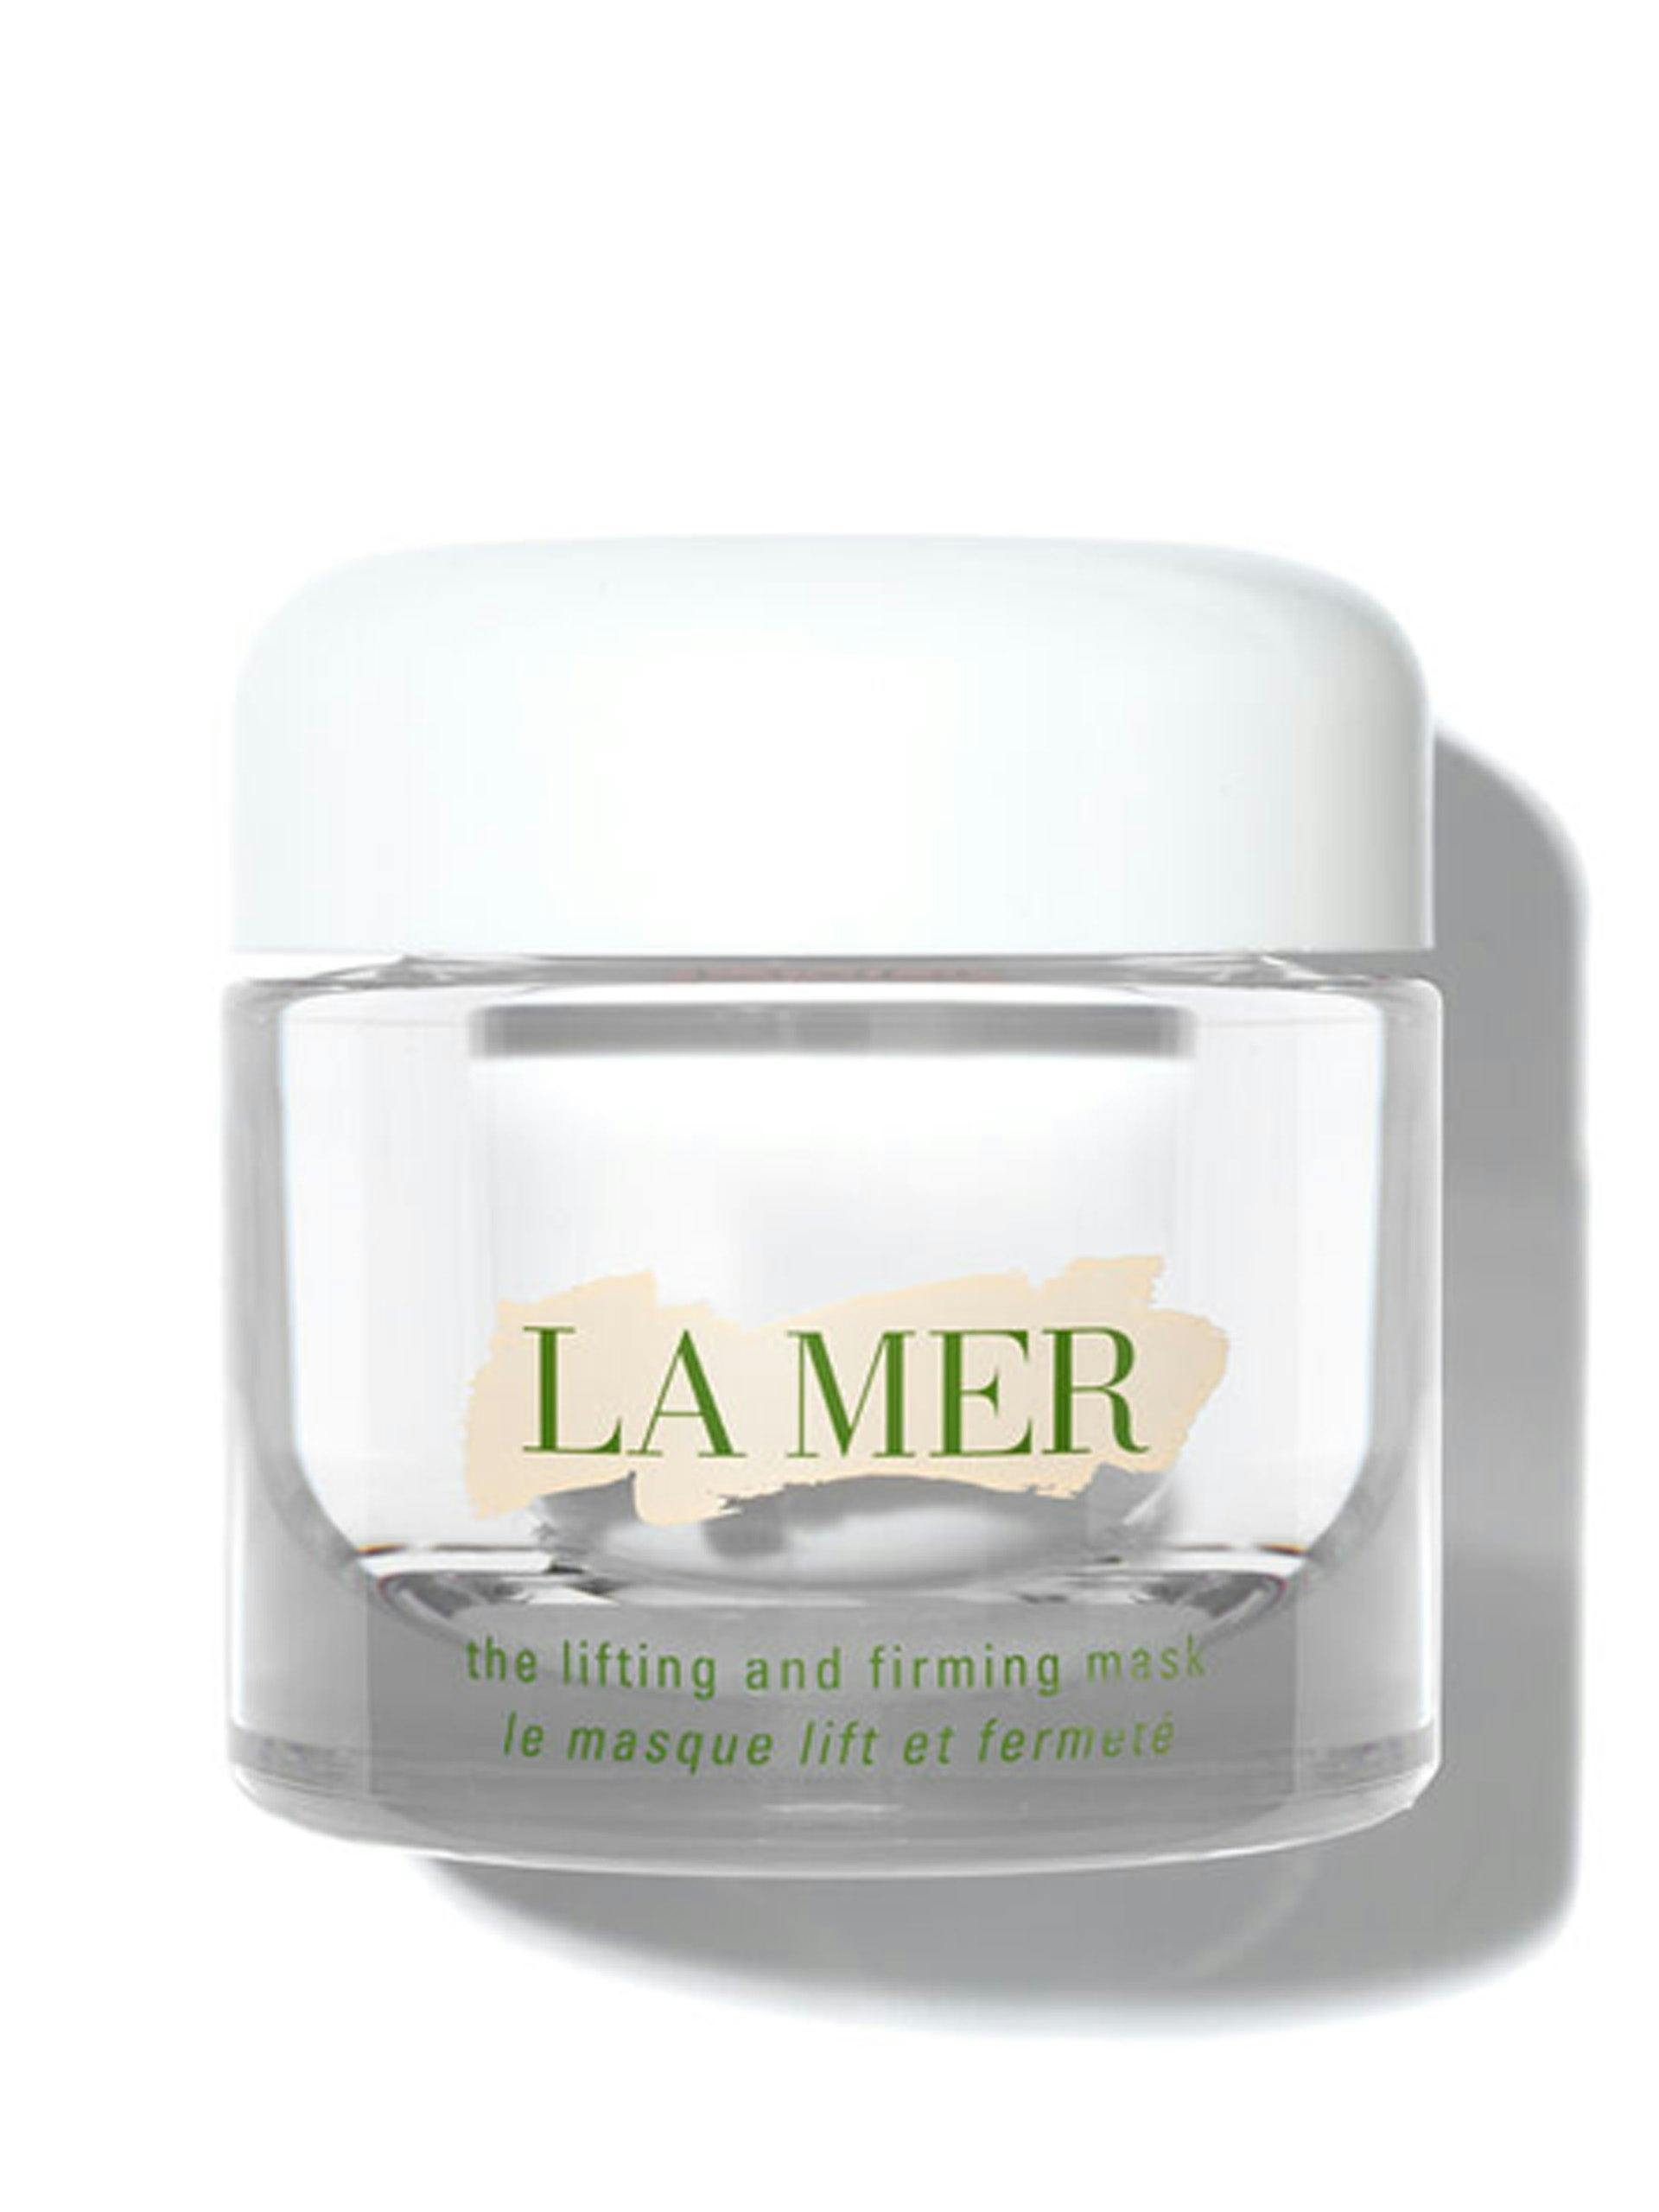 The lifting and firming mask